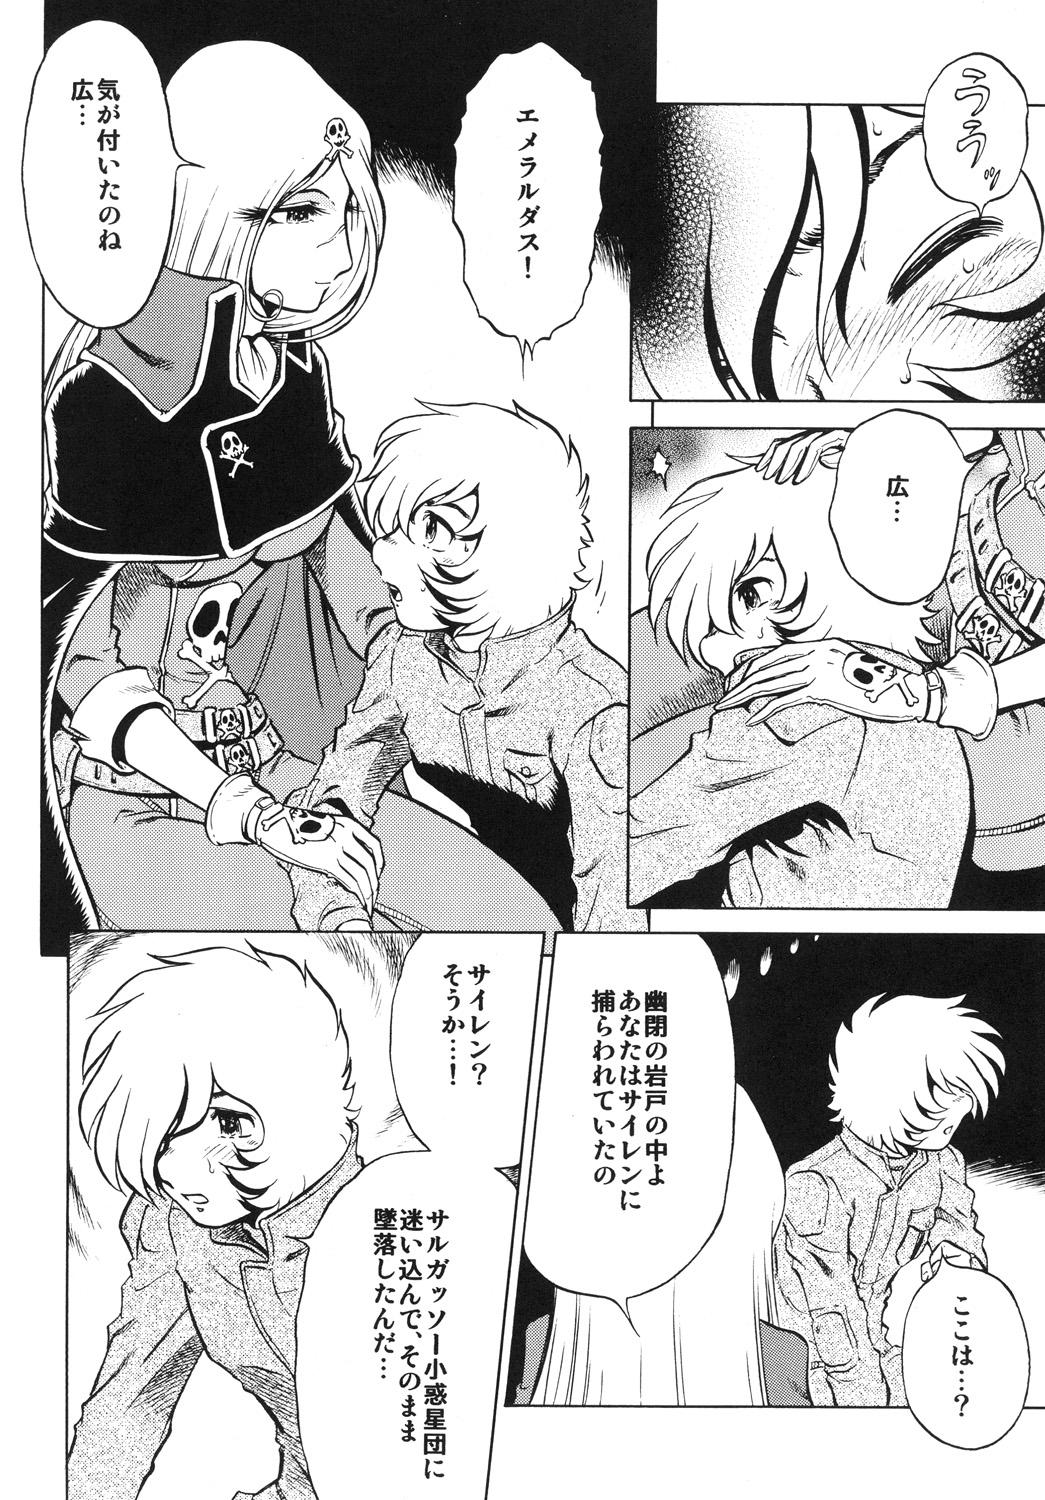 French NightHead+2 - Space pirate captain harlock Bizarre - Page 7